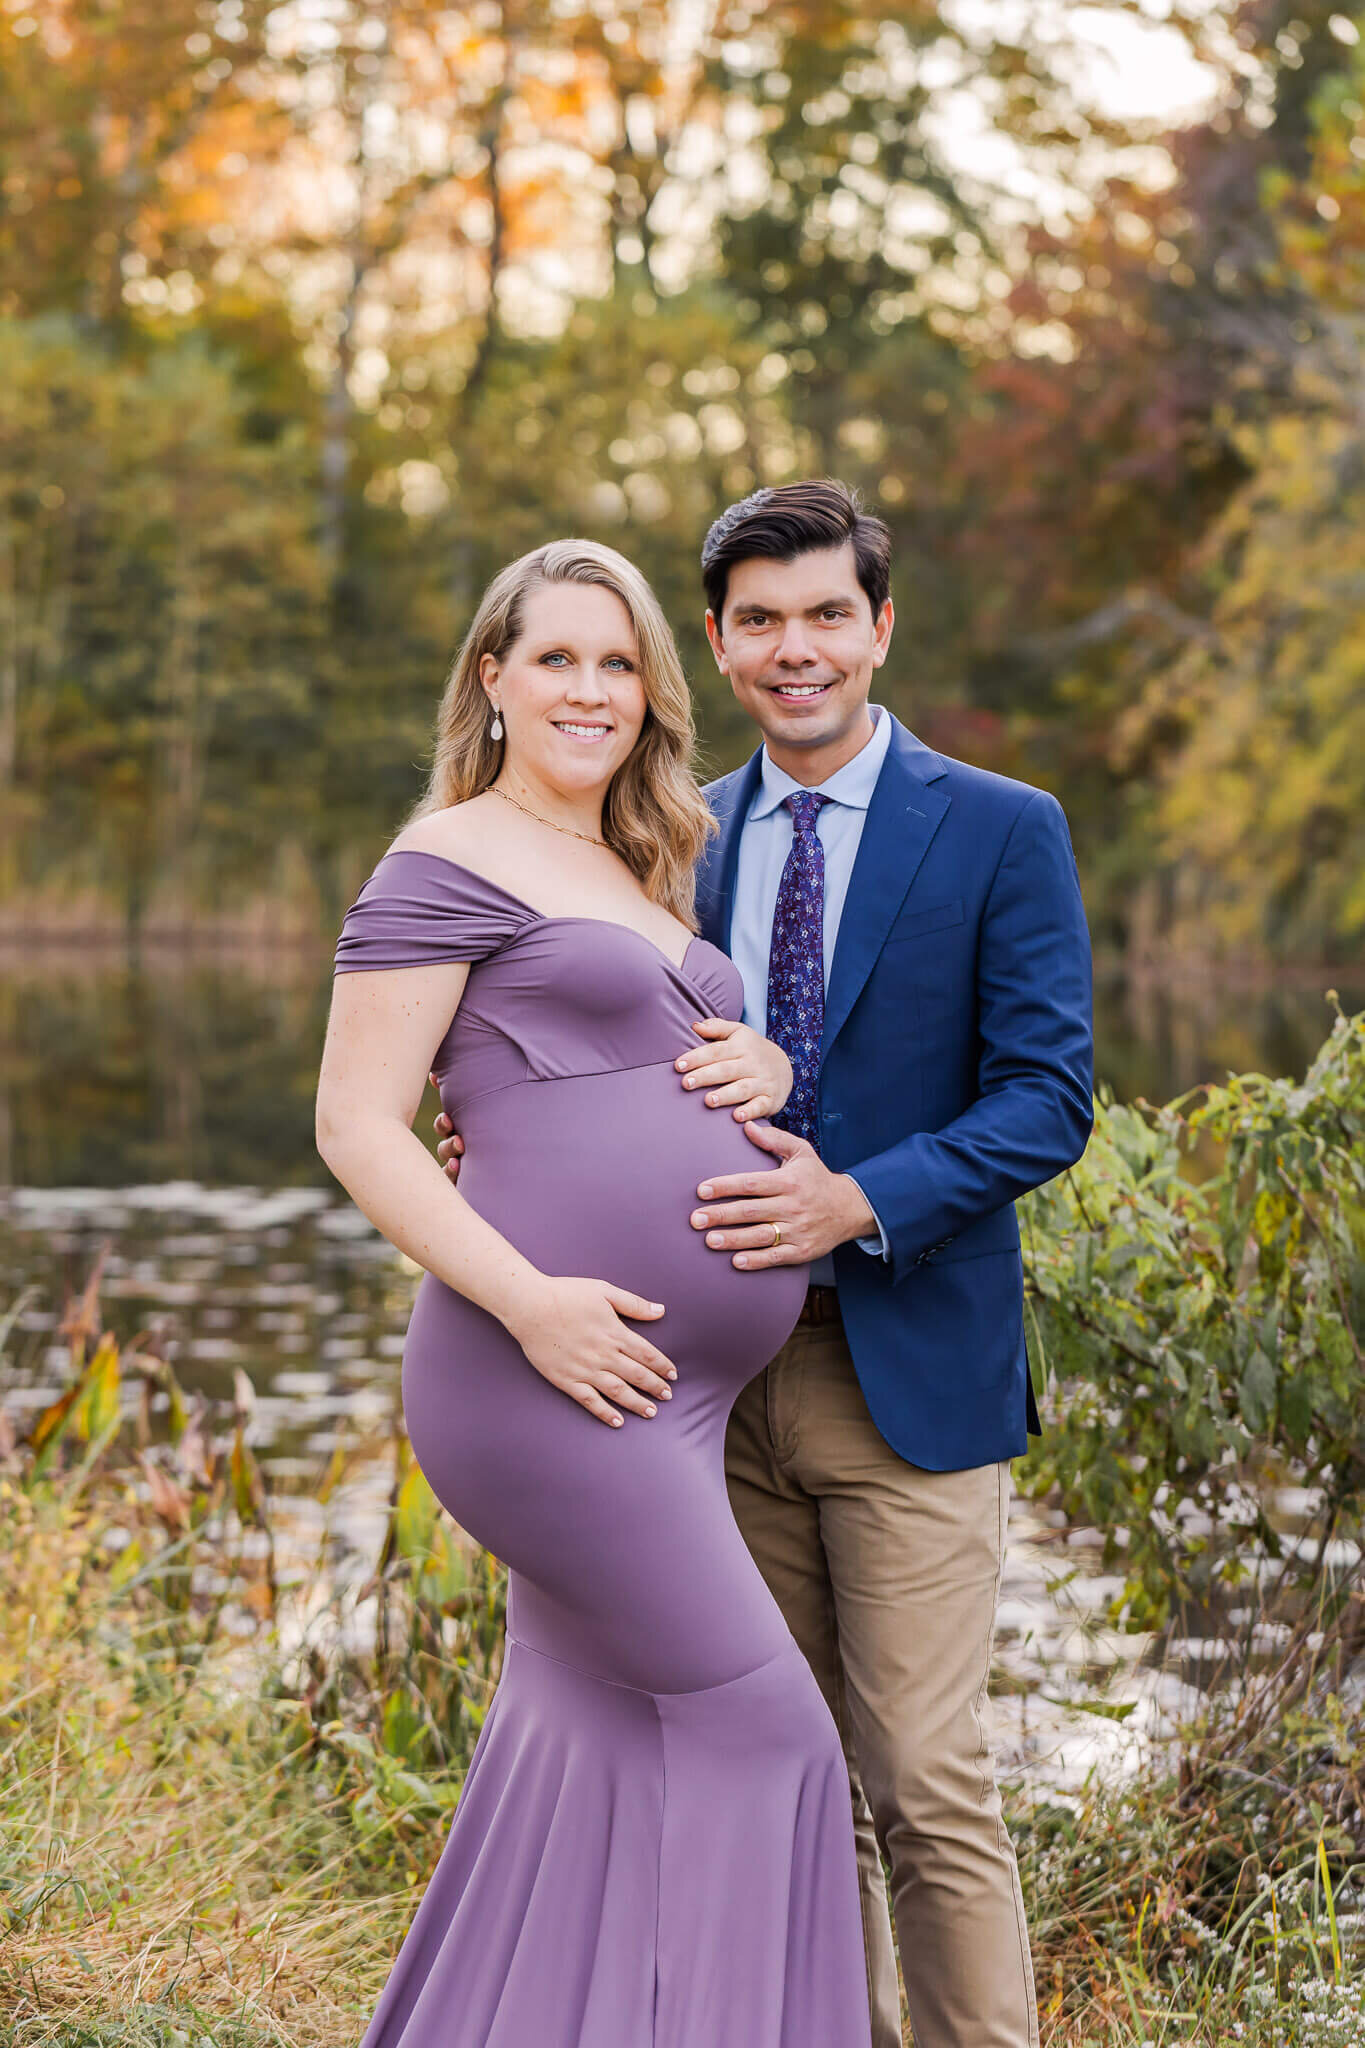 A Centreville couple posing in front of a pond for a maternity portrait session.